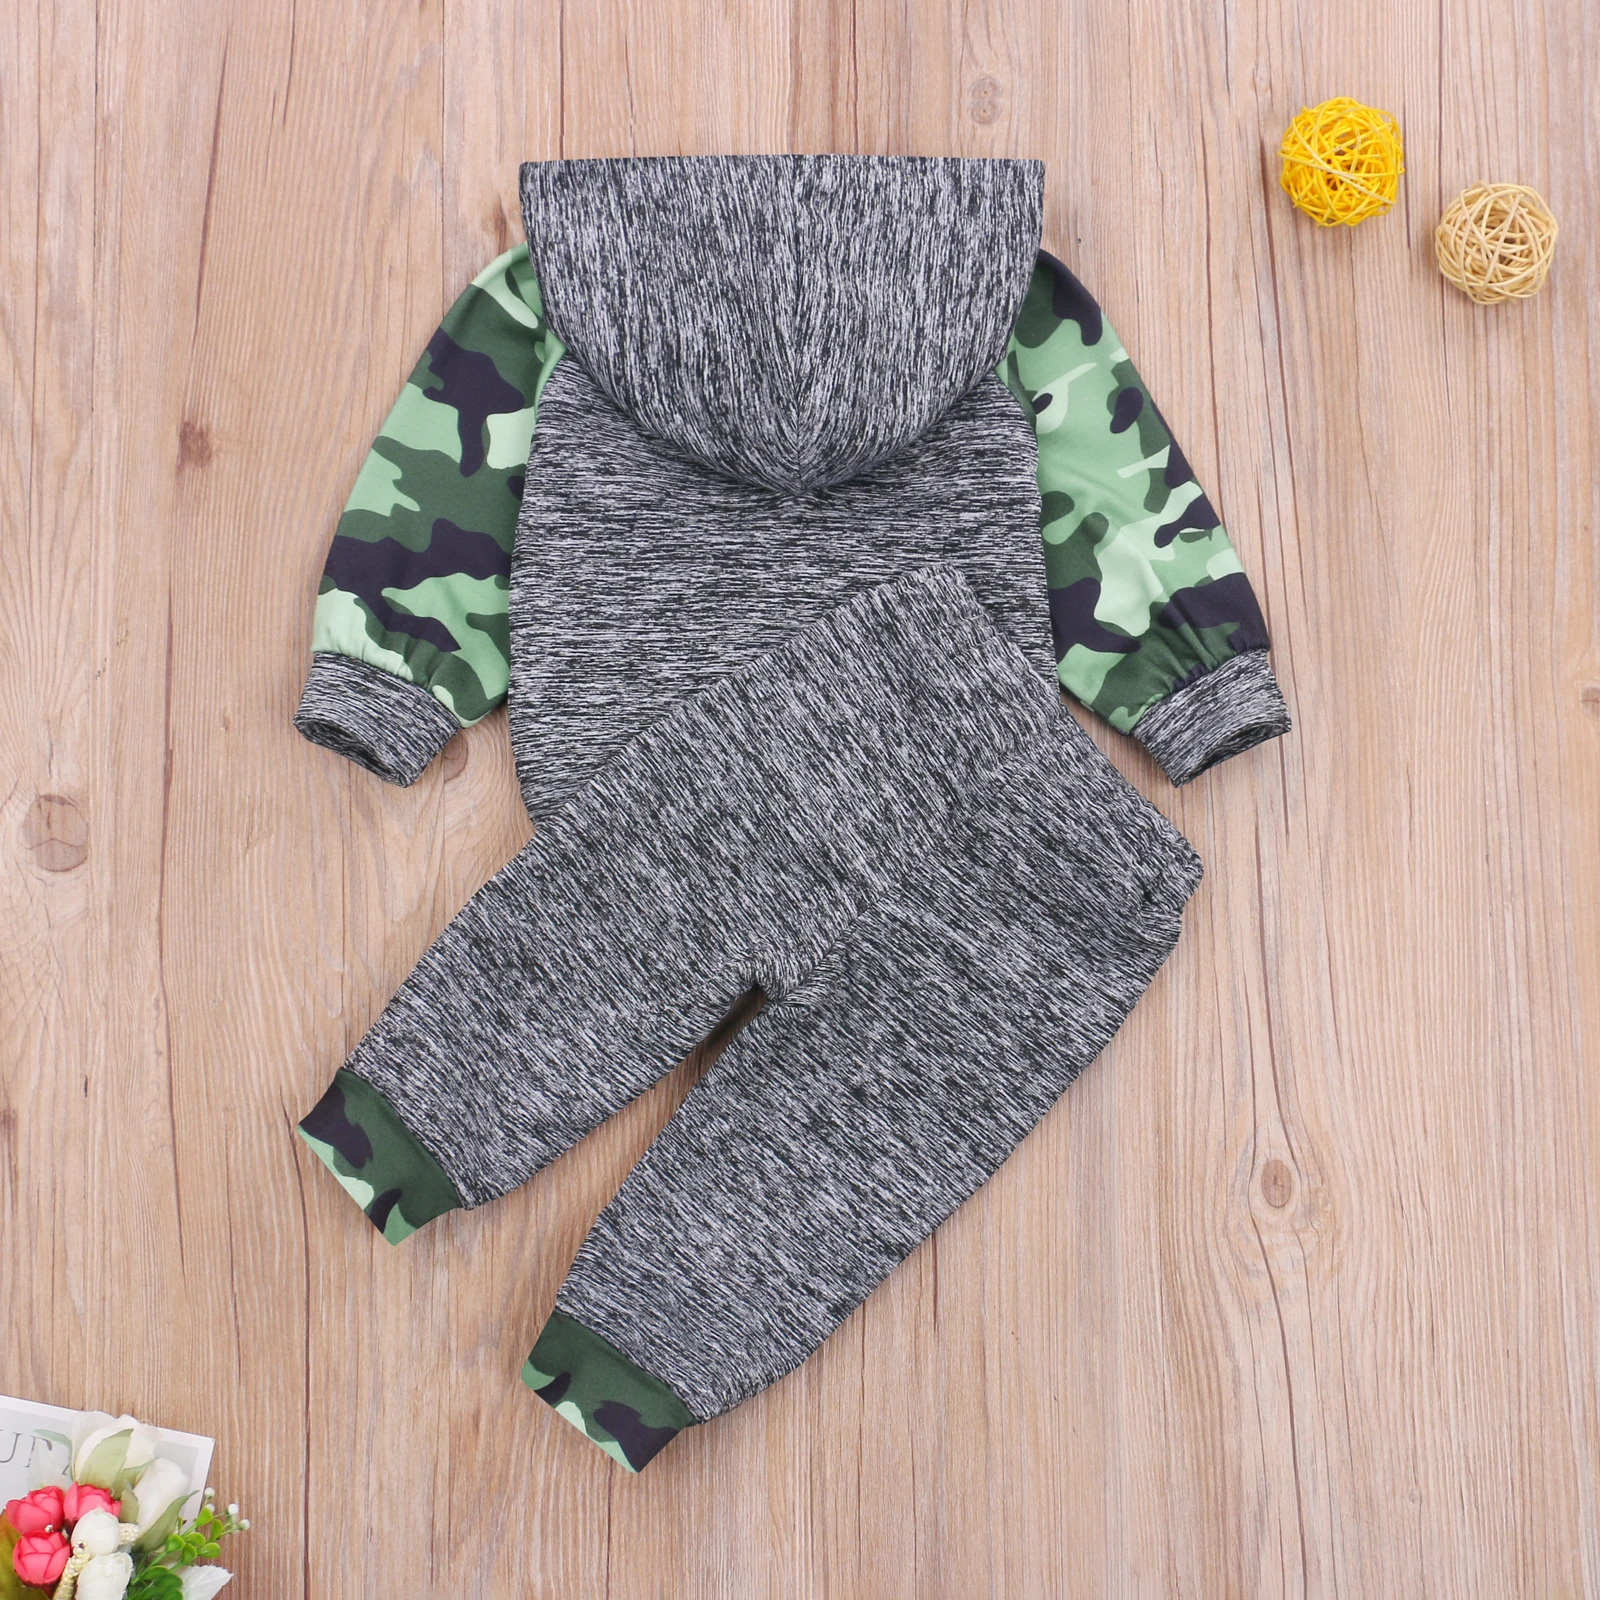 

Pudcoco 2020 Autumn 0-12M Newborn Baby Boy Girl 2Pcs Set Paper Plane Print Camo Long Sleeve Hooded Top+Trousers Toddler Outfit